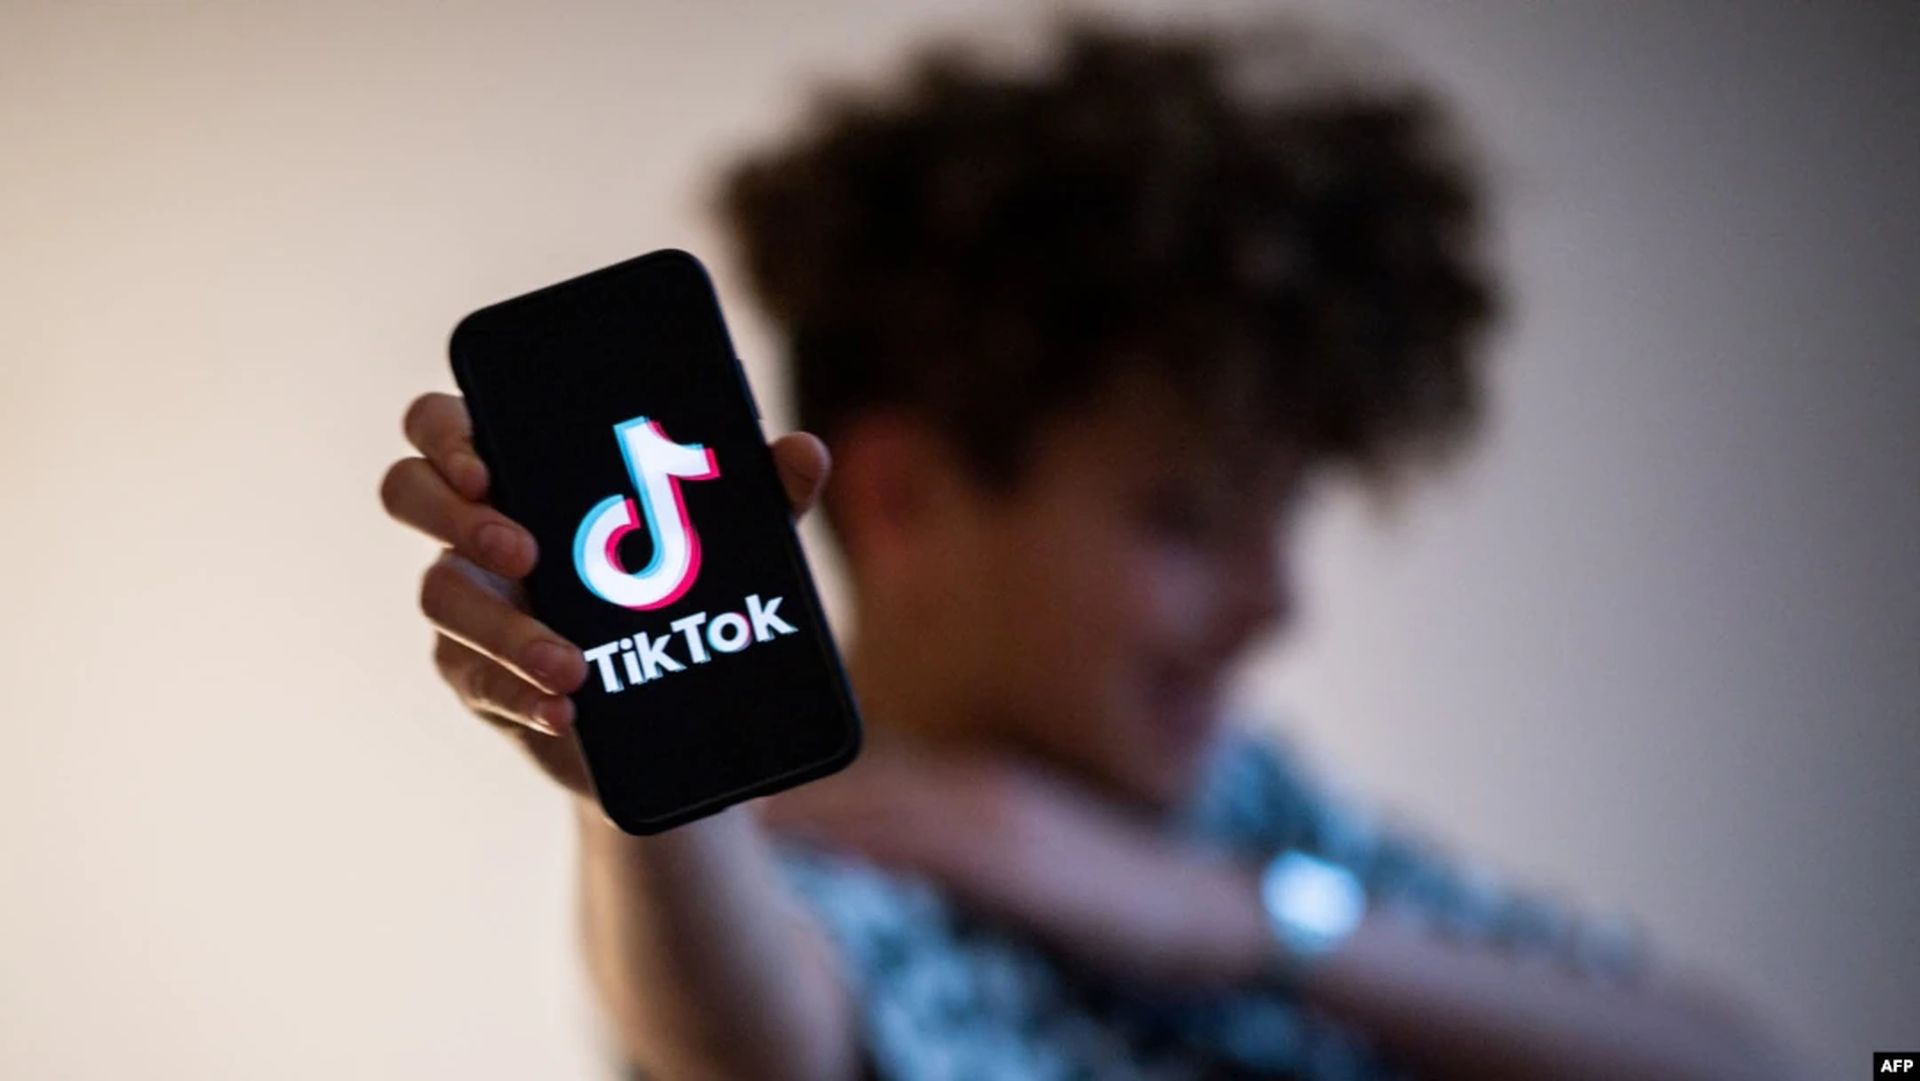 Today, we are going to be covering how to use TikTok Photo Mode, which is being added to the popular social media app as part of the enhanced editing tools update.